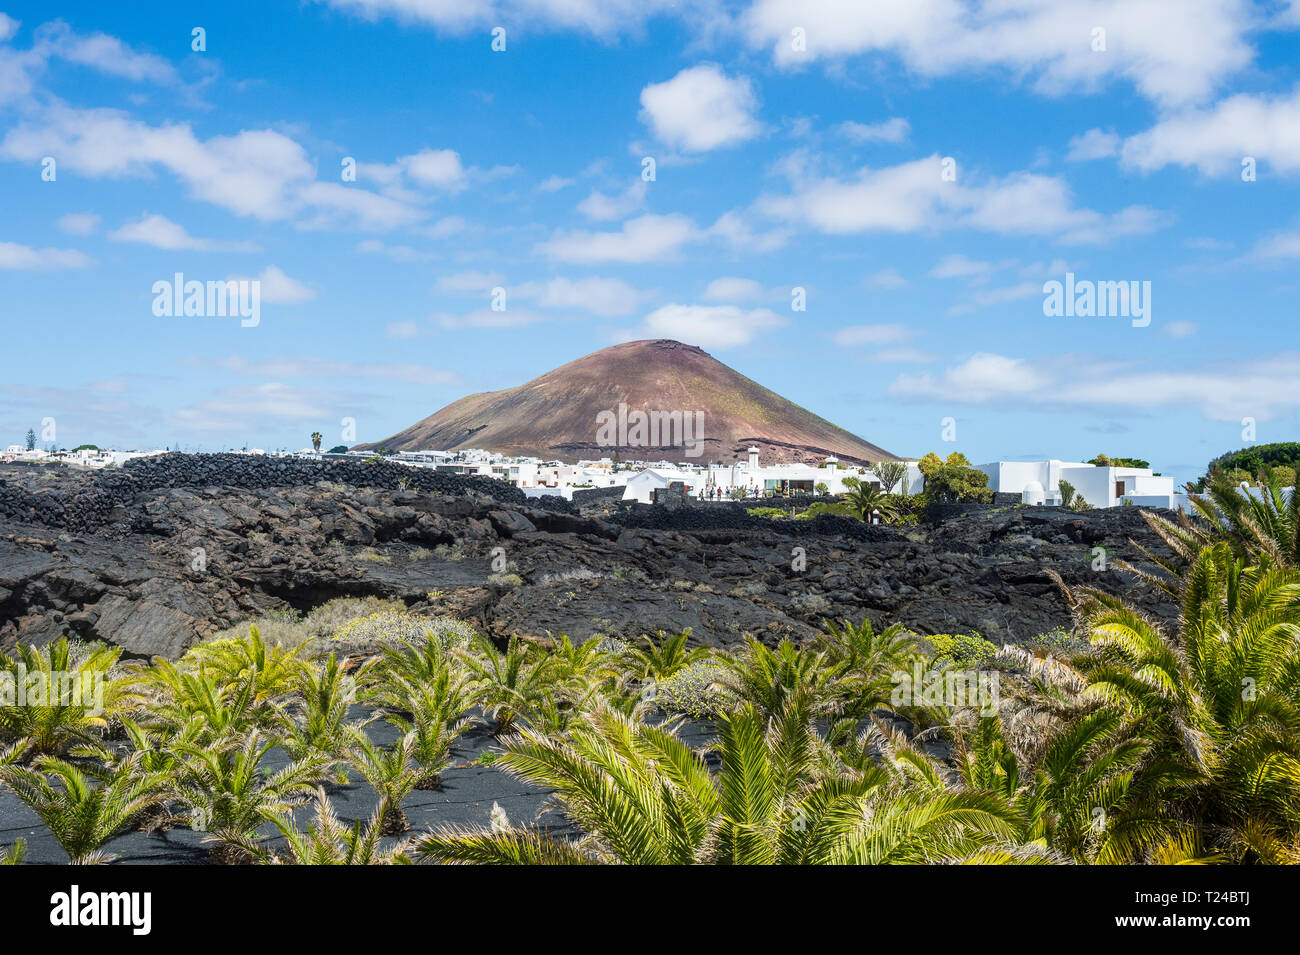 Spain, Canary Islands, Lanzarote, La Geria, view to wine-growing district with volcanic cone in the background Stock Photo